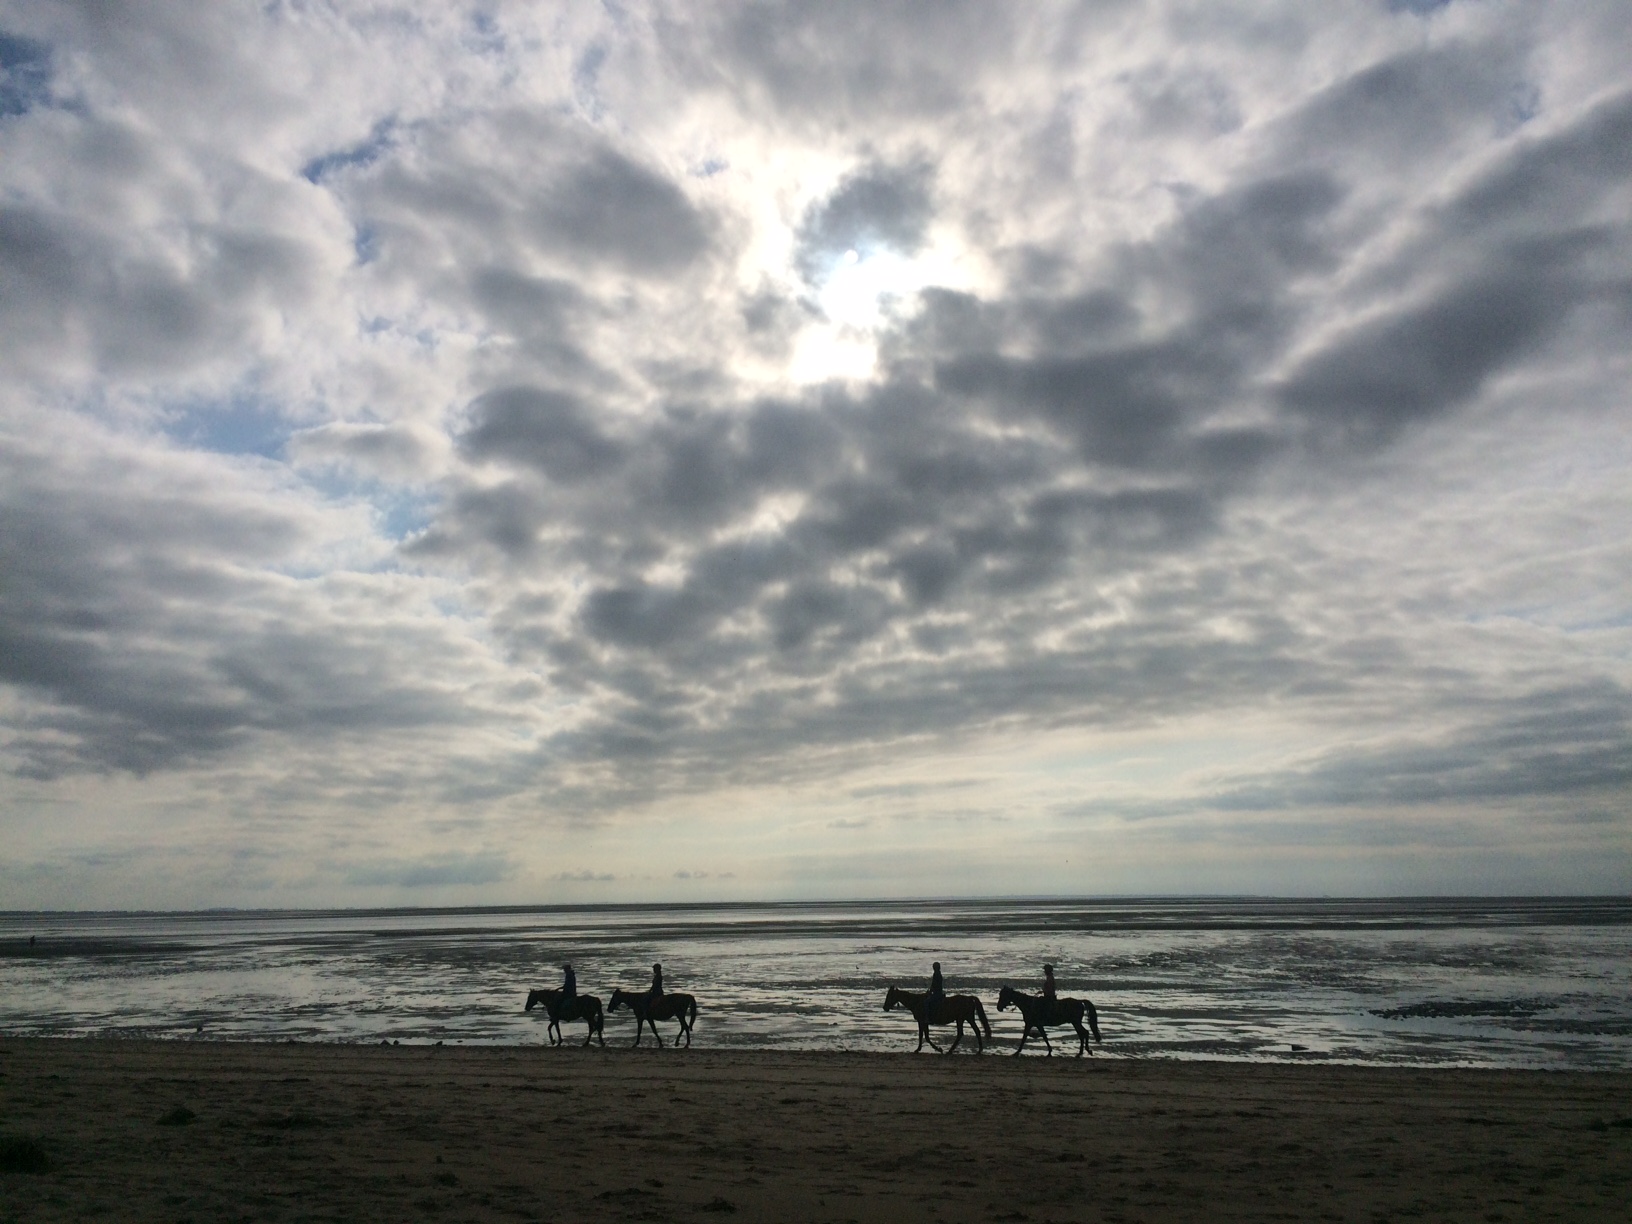 Cheval plage